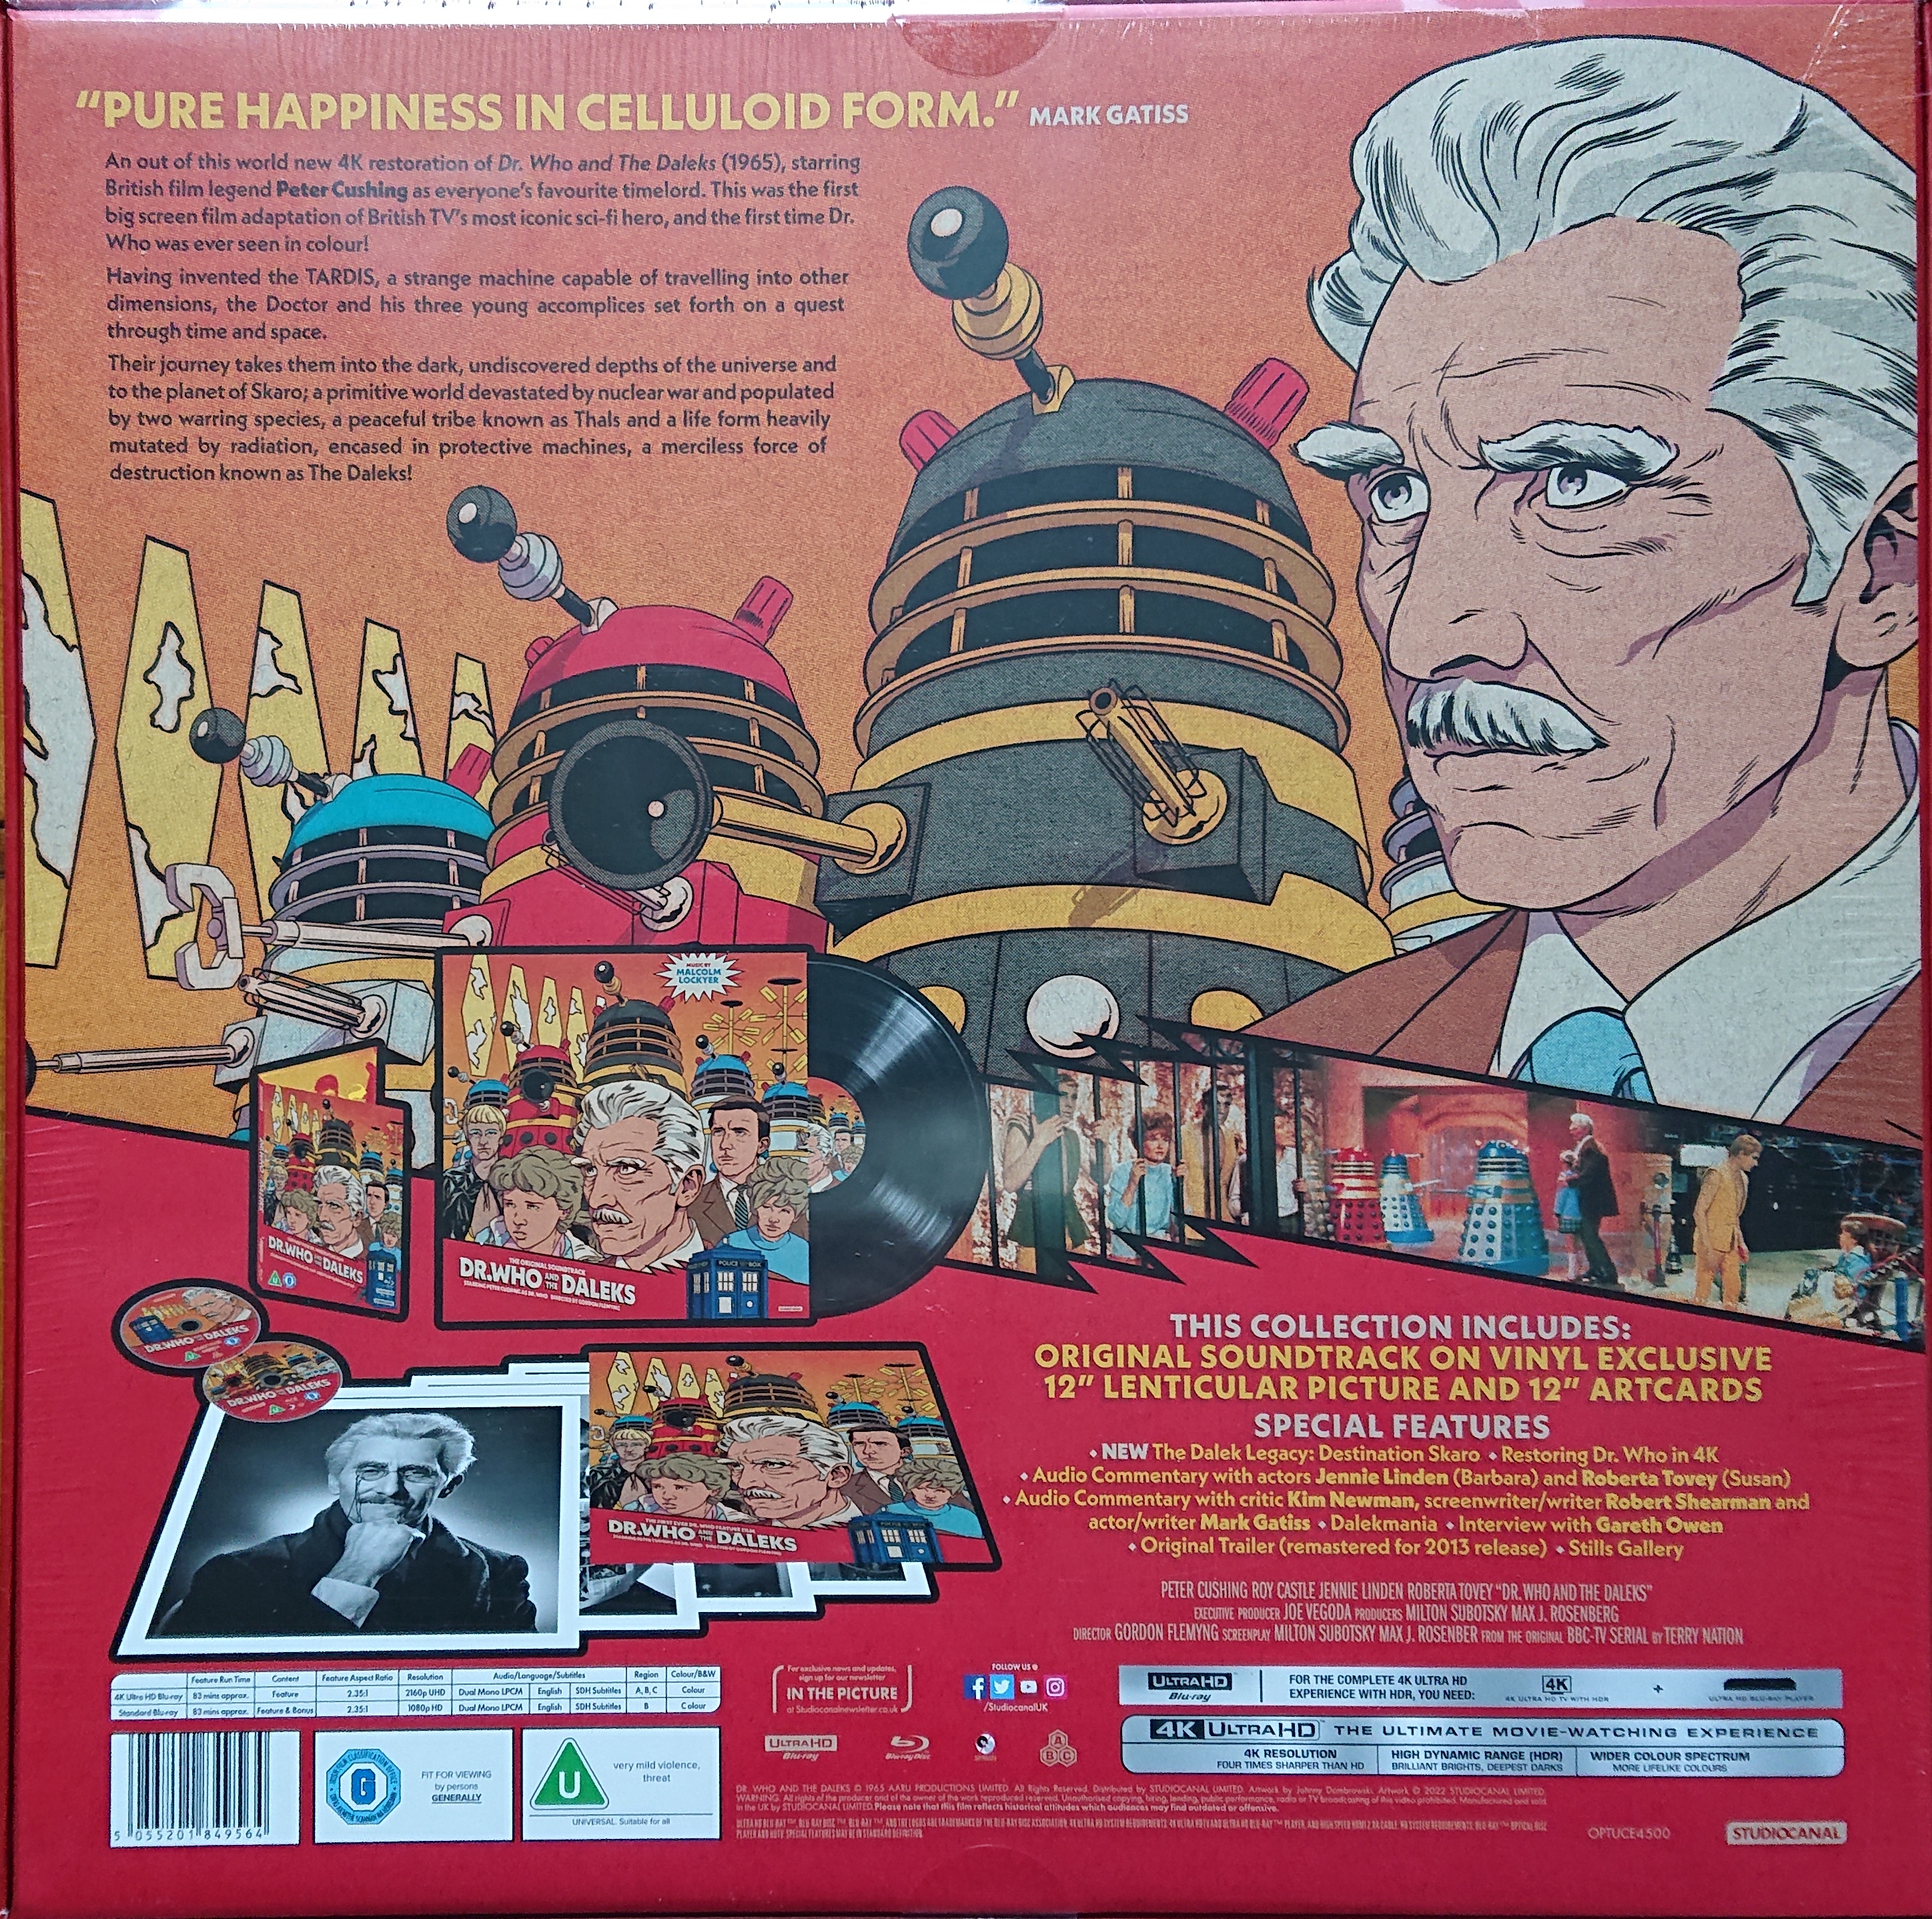 Picture of OPTUCE 4500 Dr. Who and the Daleks by artist Terry Nation / Milton Subotsky from the BBC records and Tapes library